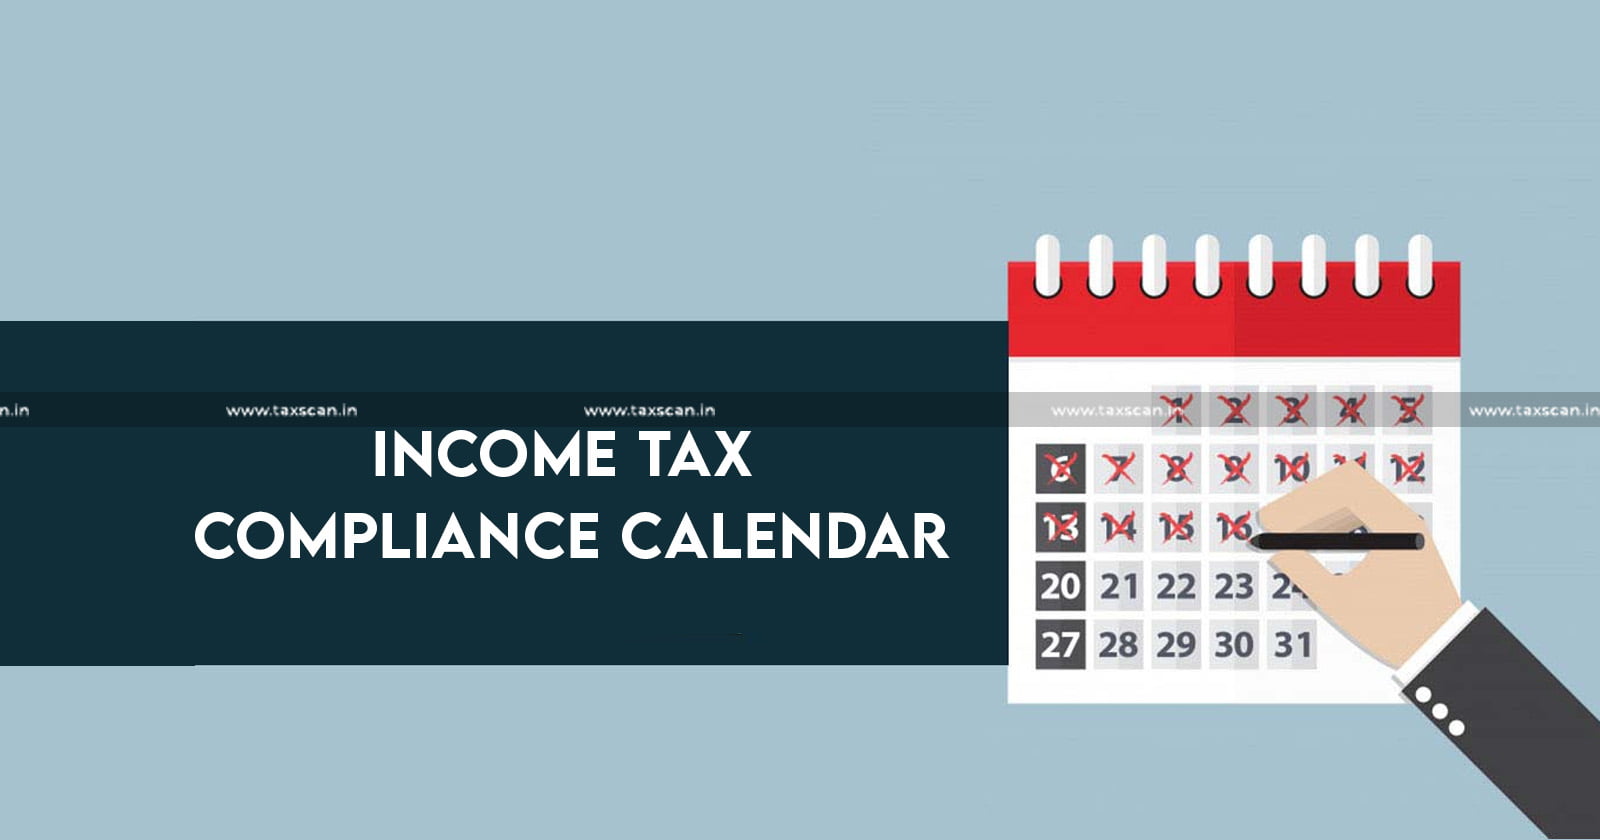 Income Tax Compliance Calendar for September 2023 -Income Tax Compliance Calendar- Tax Compliance Calendar - Income Tax - taxscan